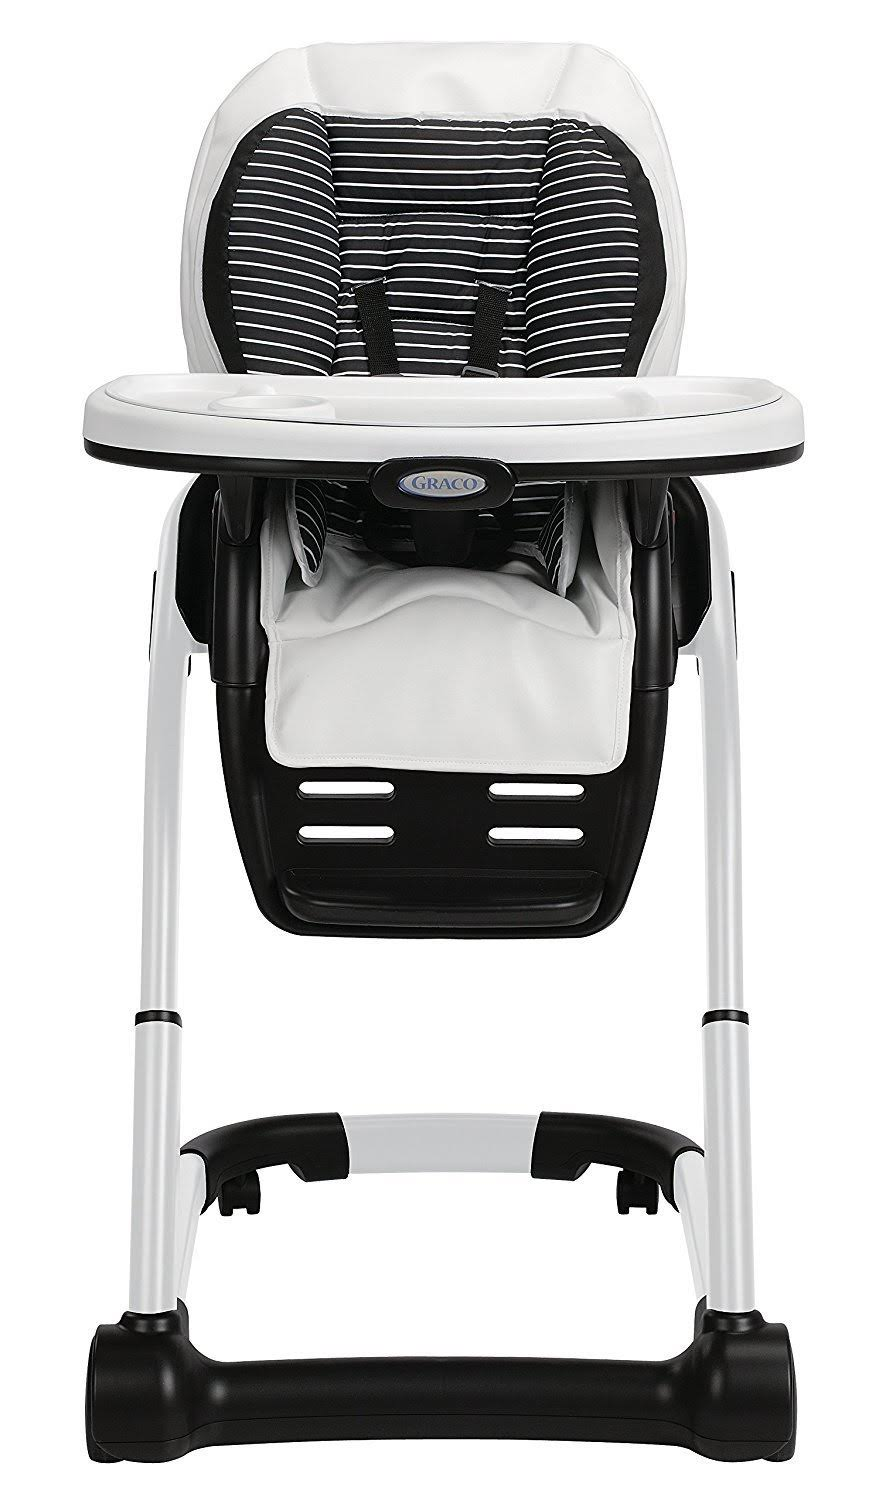 Graco Blossom 4-in-1 Convertible High Chair Seating System  C Studio